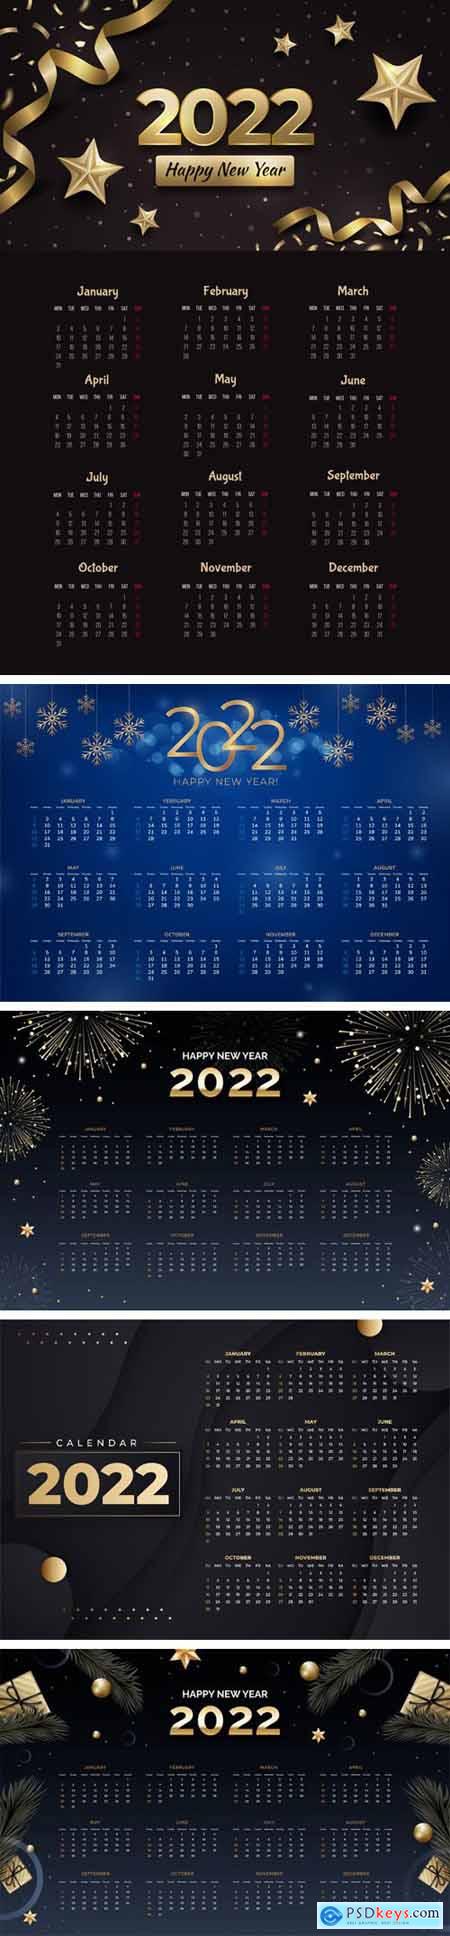 5 Modern Calendars for New Year 2022 Vector Templates